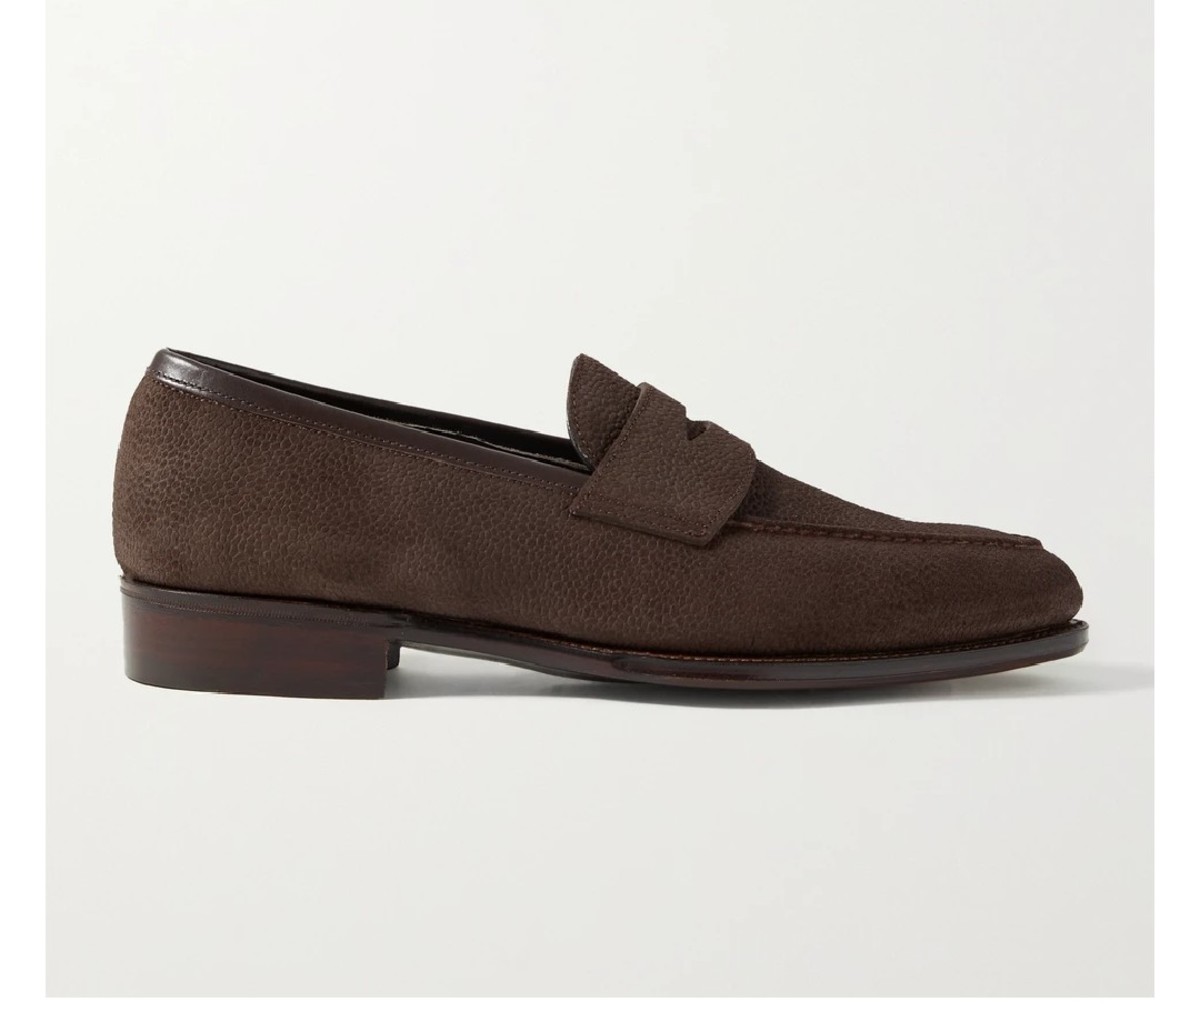 A George Cleverley Bradley III Leather-Trimmed Pebble-Grain Suede Penny Loafer